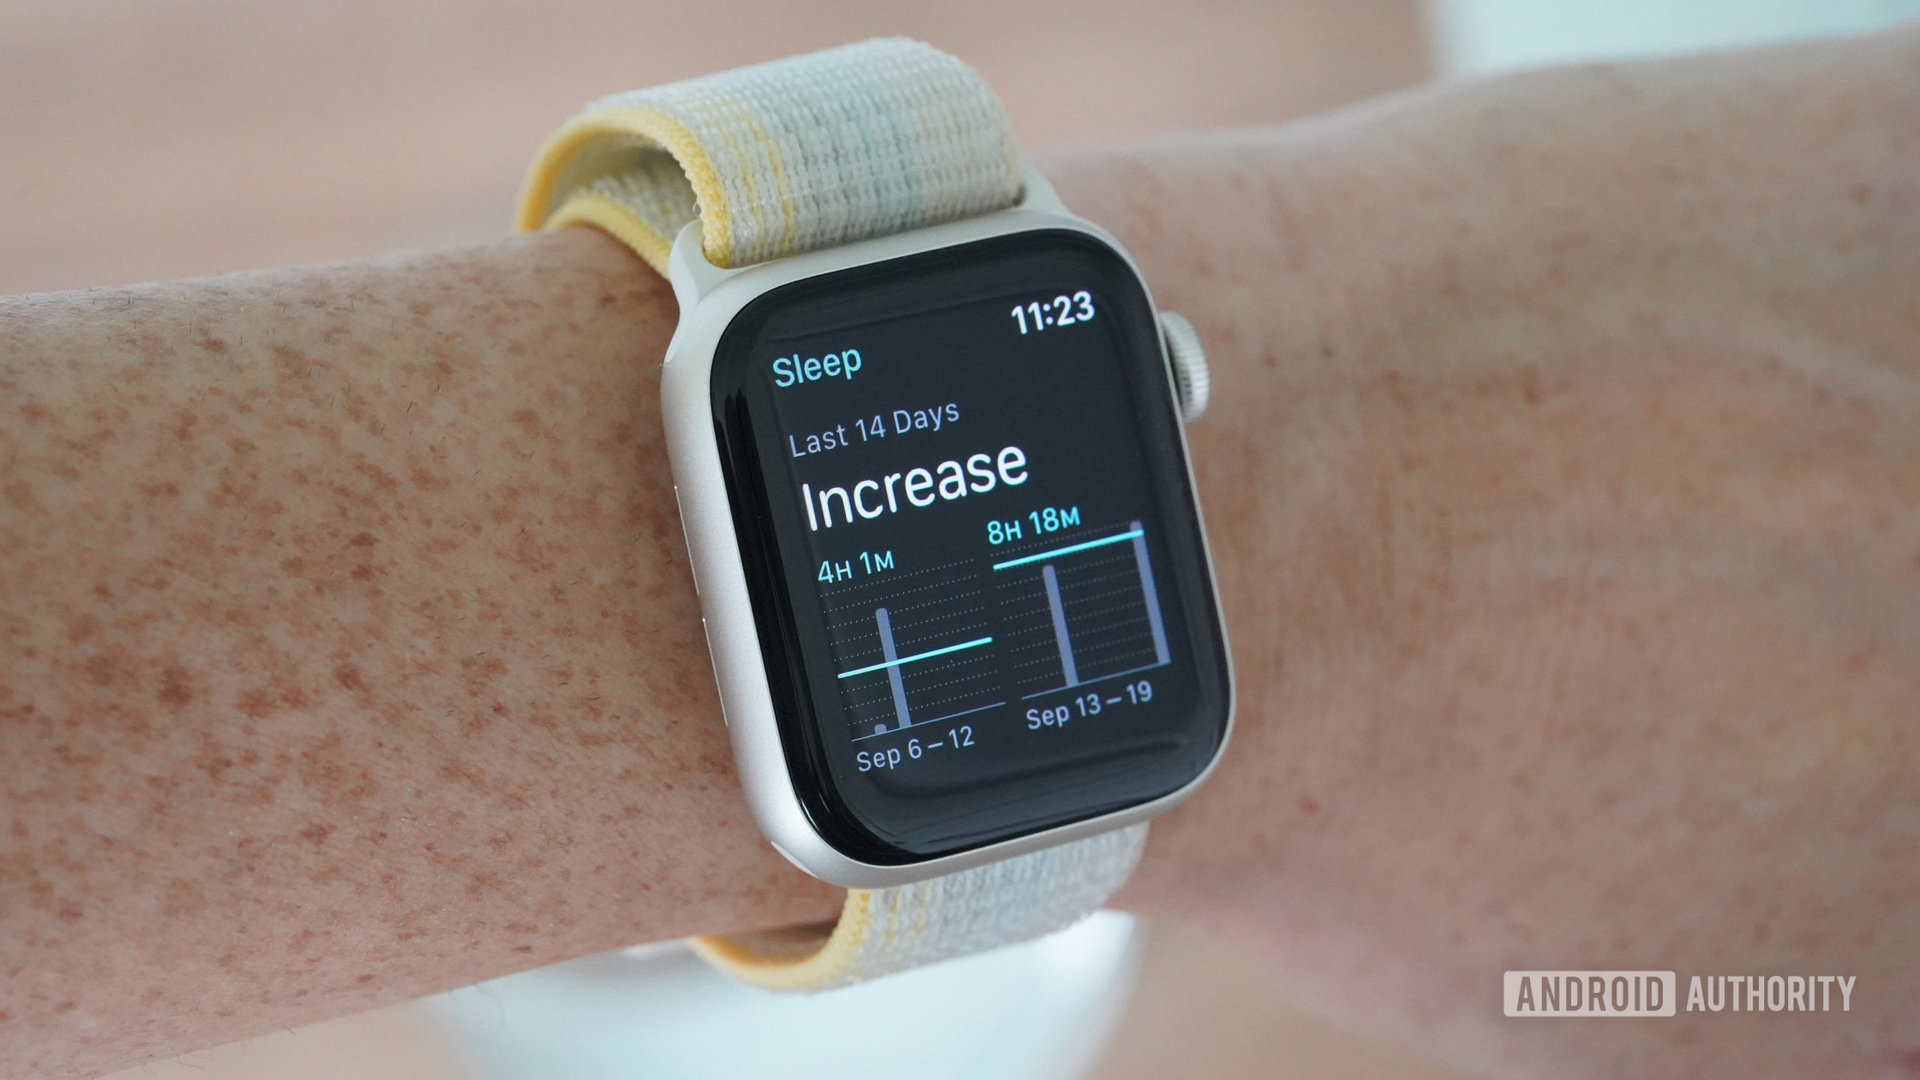 How to get better sleep with a smartwatch